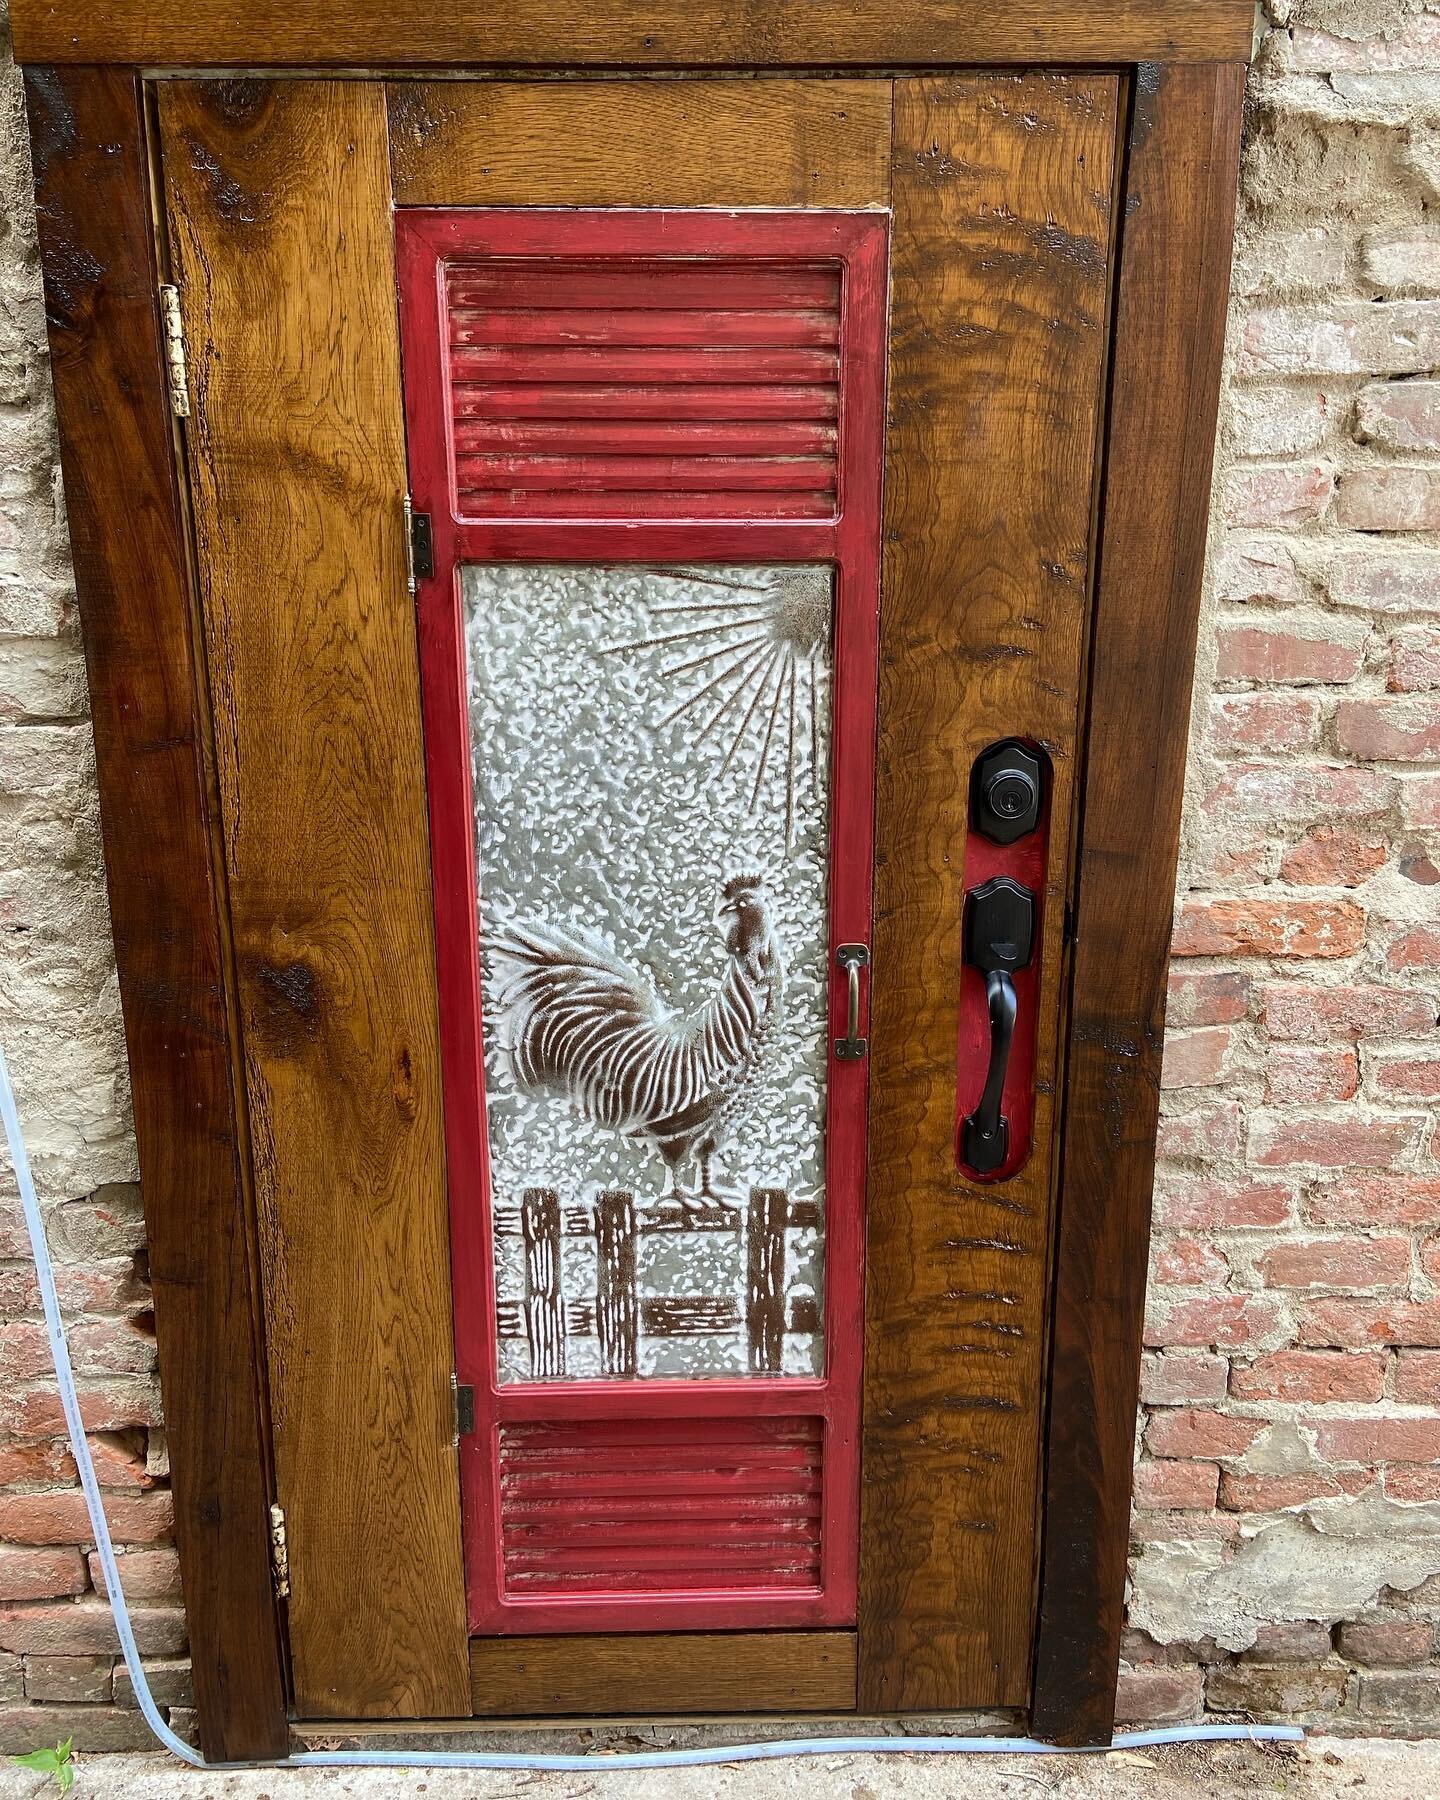 With the weather warming up was able to finish The Roost door.